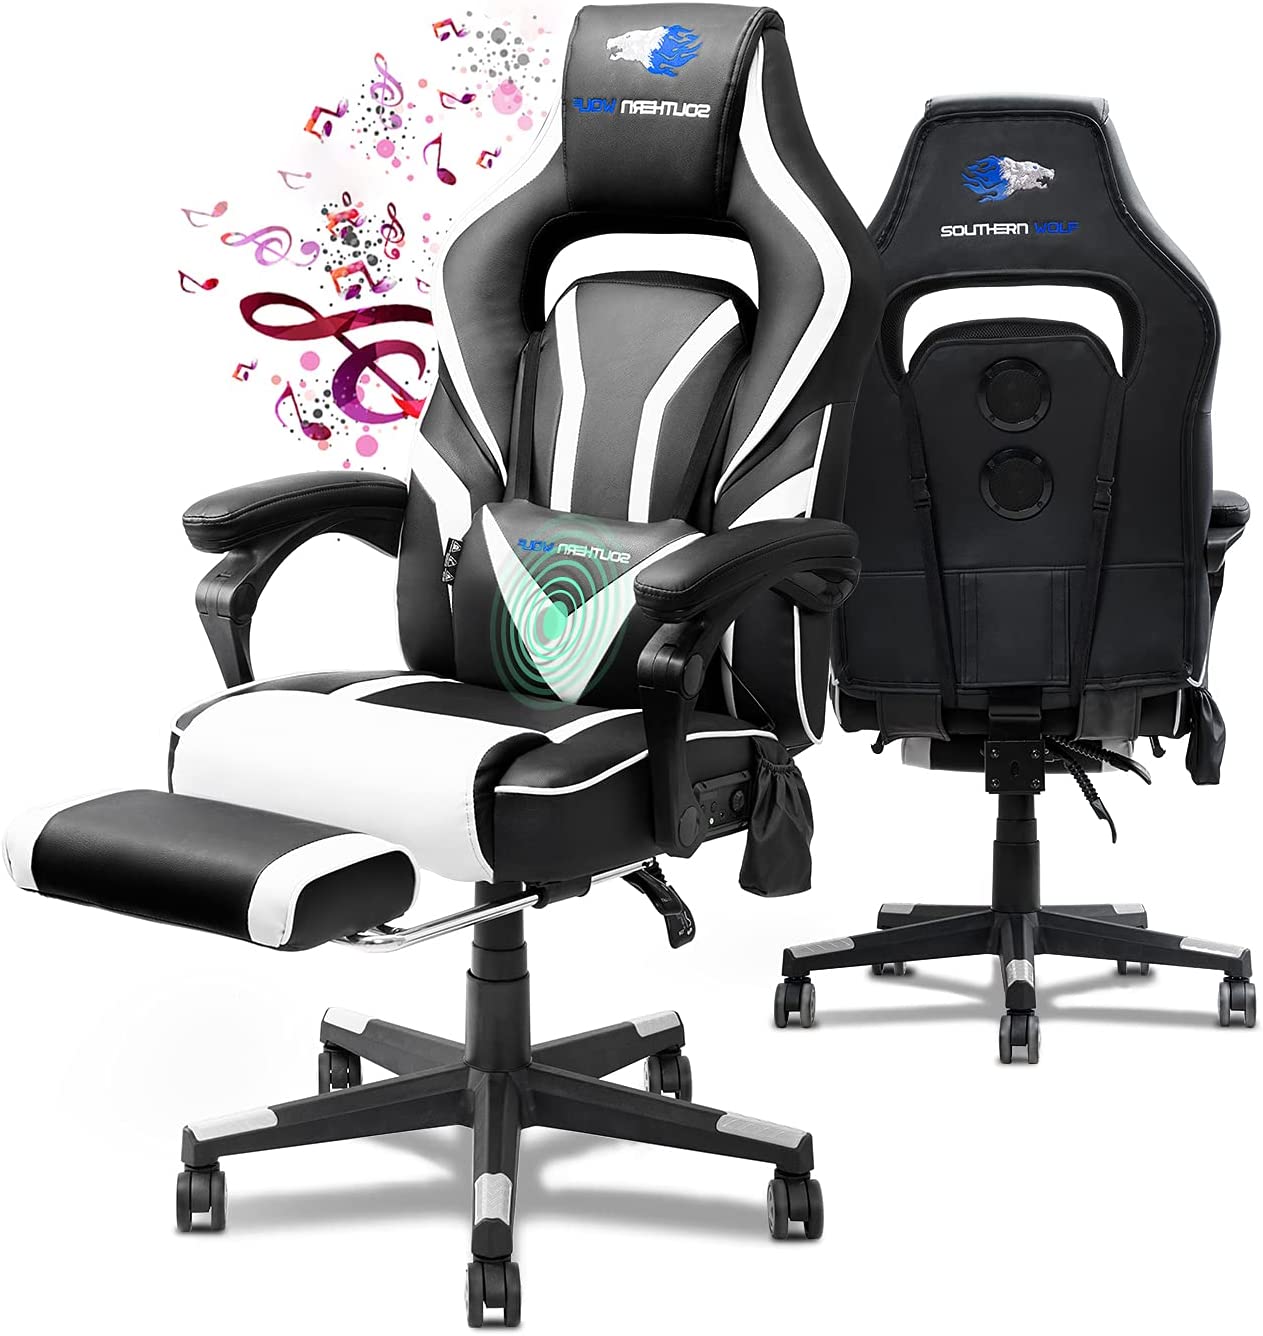 Southern Wolf best gaming chairs with speakers